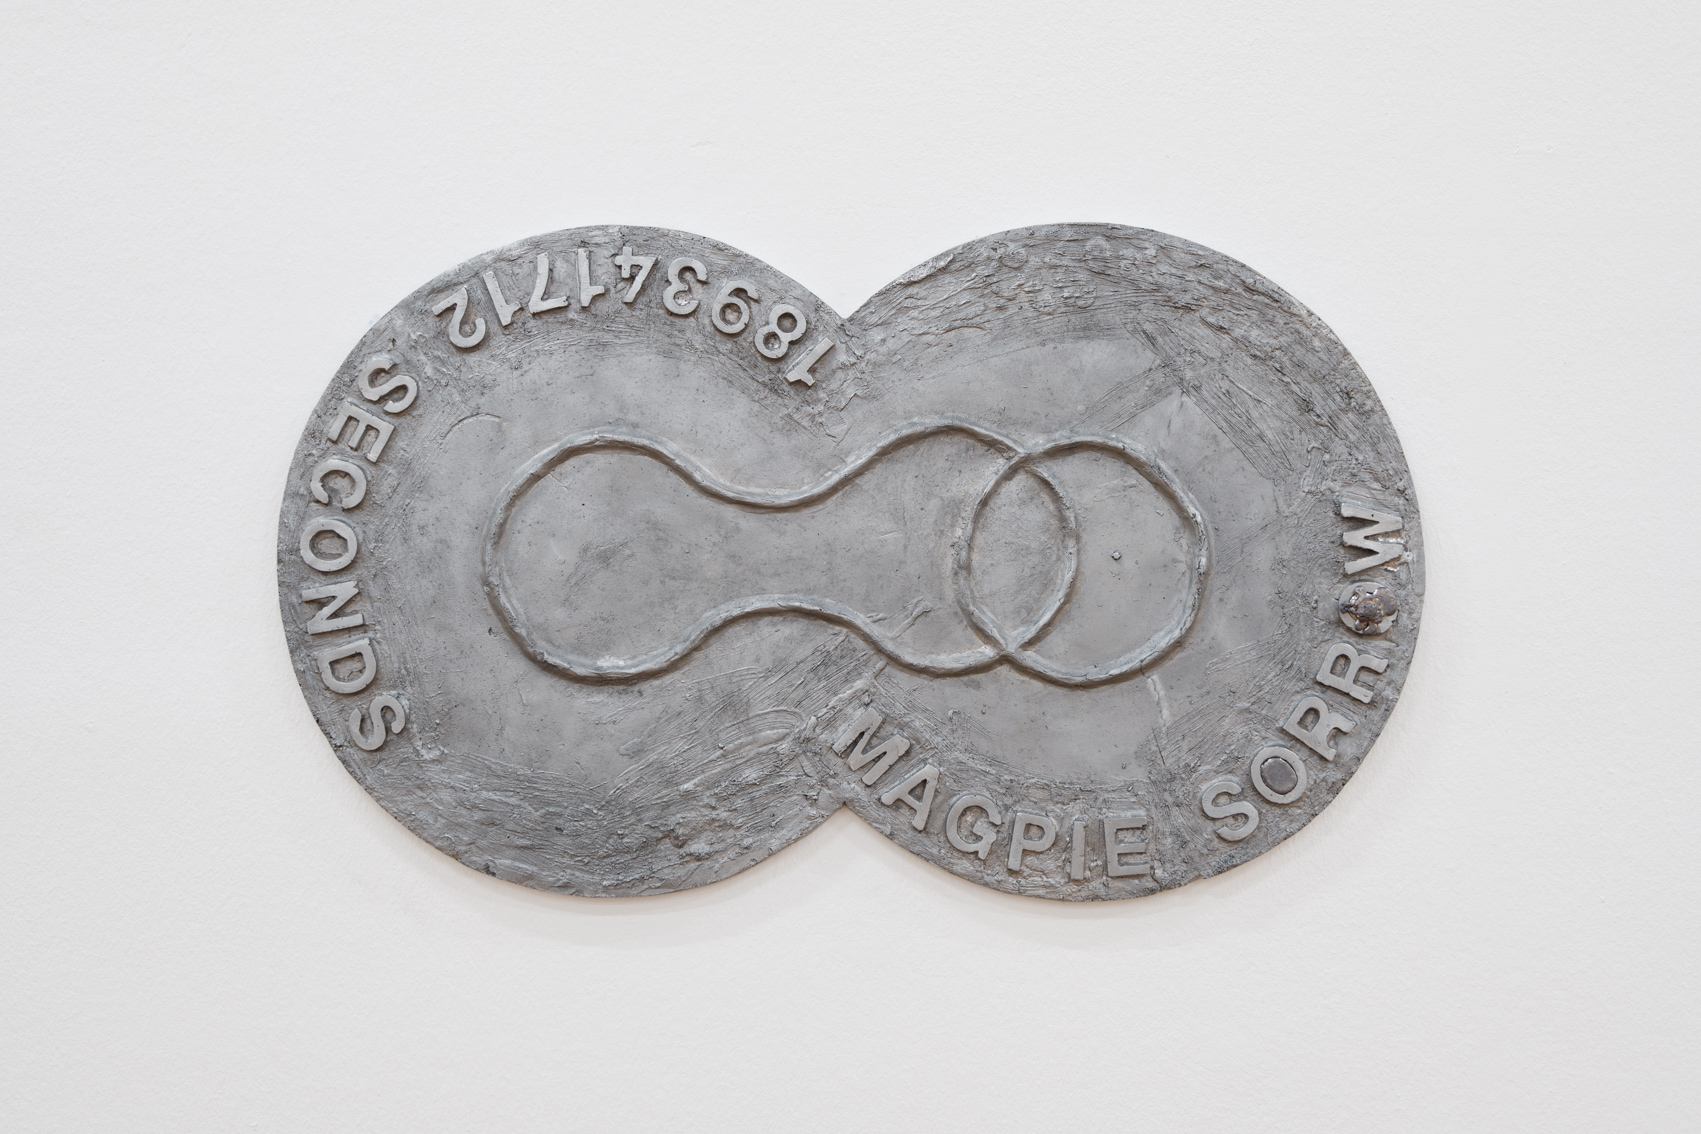 James Lewis, Country of Error (MAGPIE SORROW), 2021, series of wall works, cast aluminium, lead, each 102 x 60 x 3 cm, courtesy of Galerie Hubert Winter, Vienna